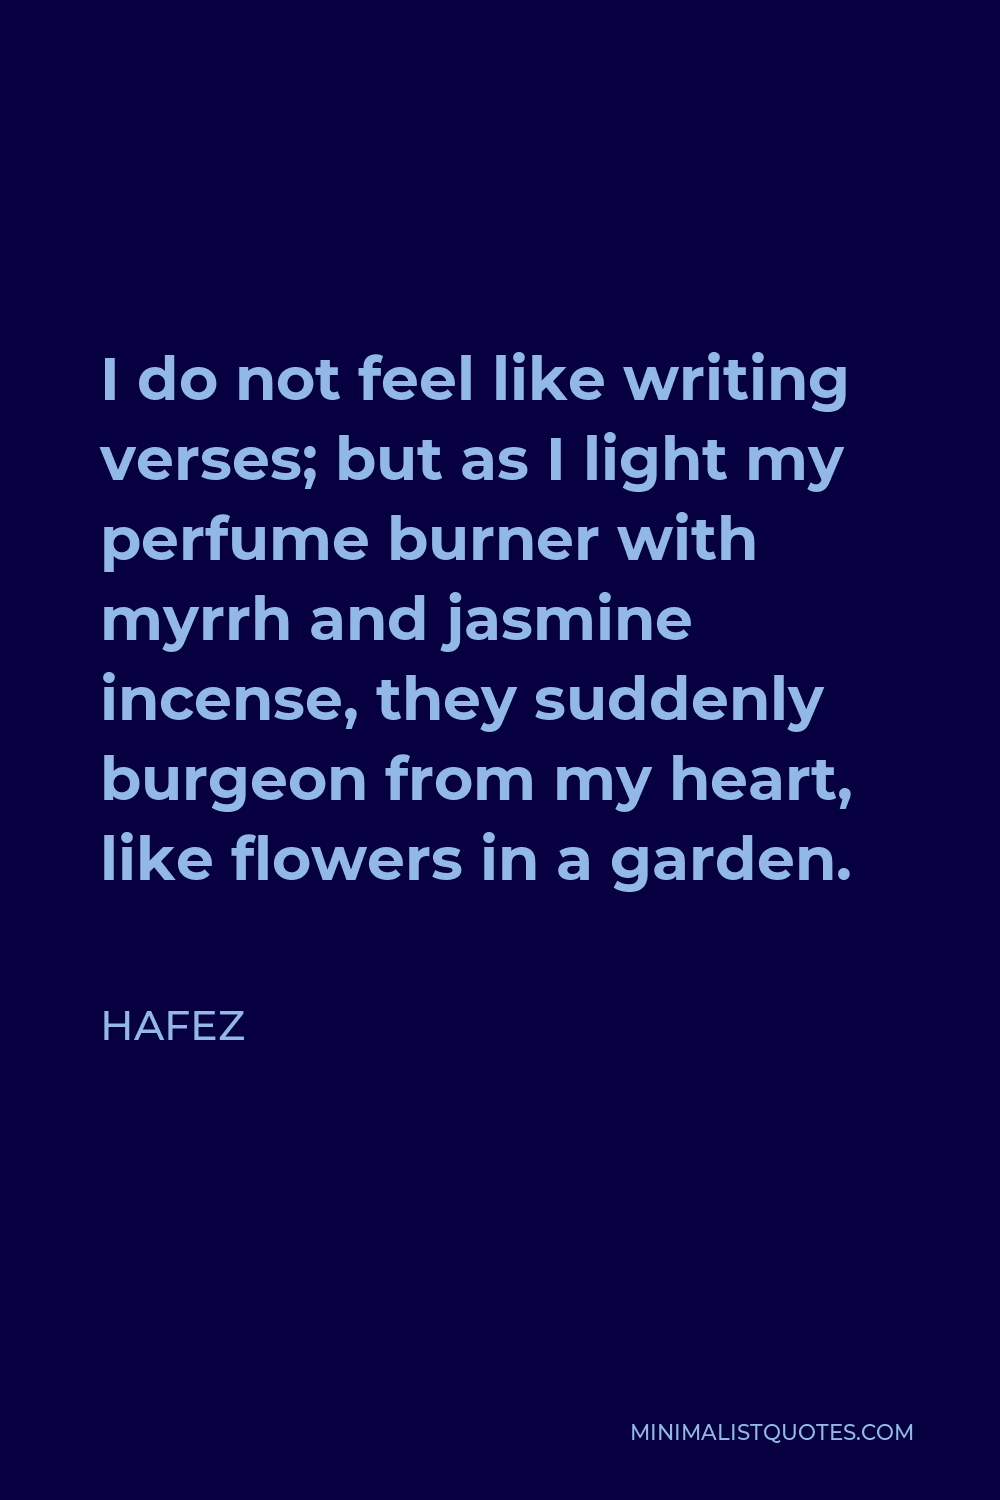 Hafez Quote - I do not feel like writing verses; but as I light my perfume burner with myrrh and jasmine incense, they suddenly burgeon from my heart, like flowers in a garden.